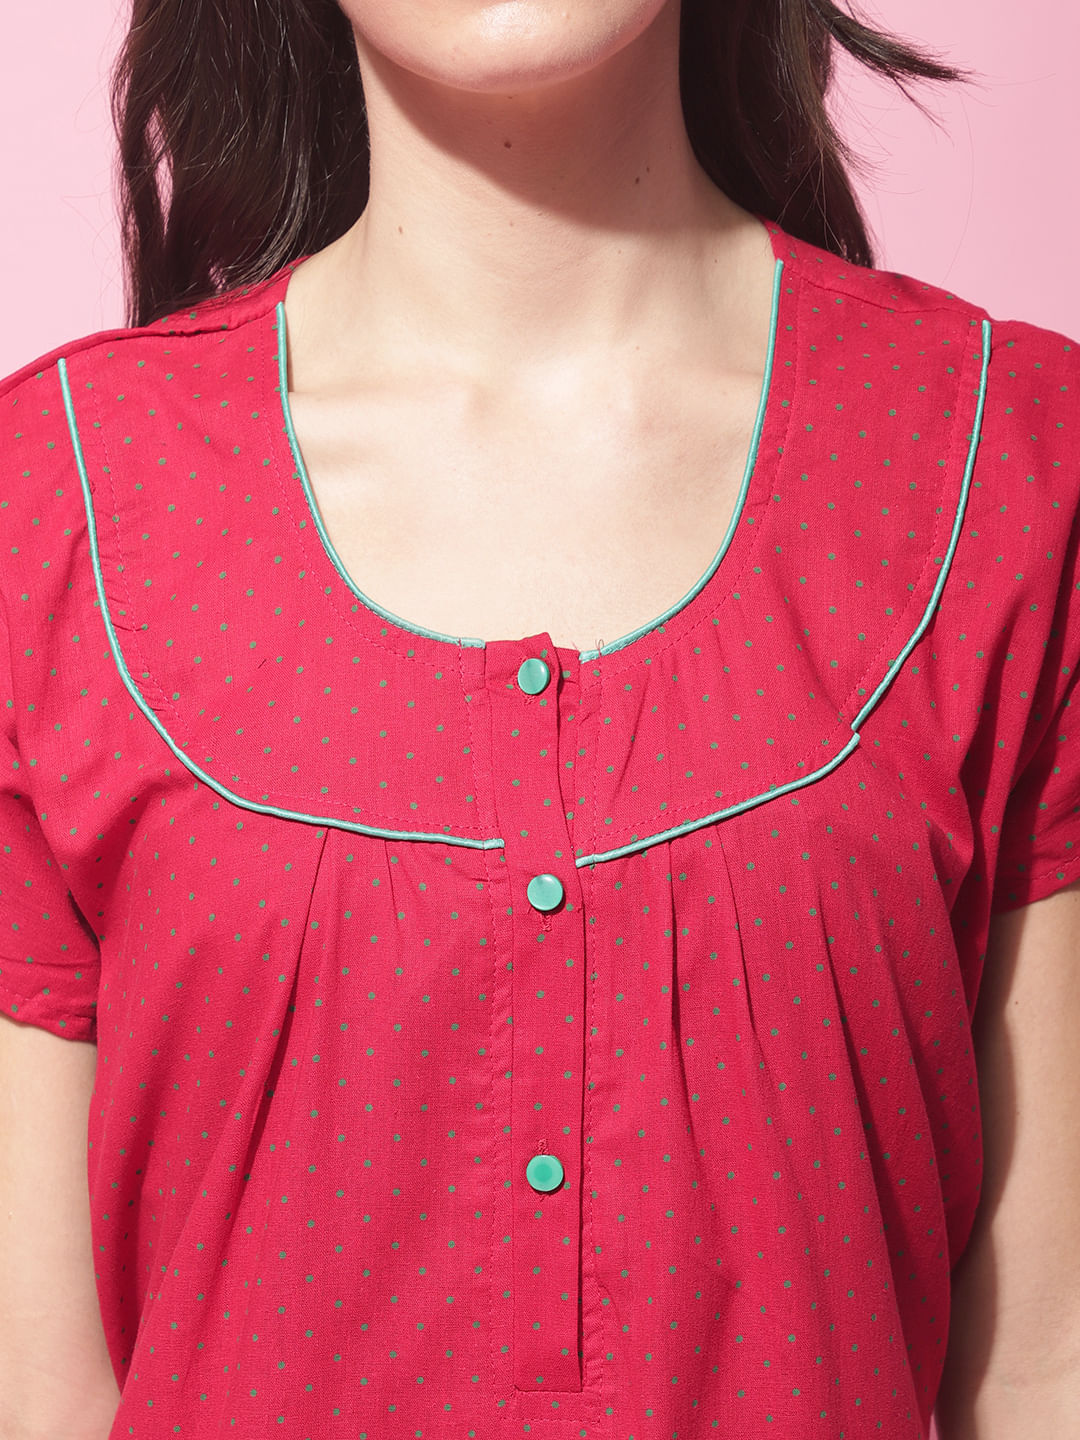 Red Cotton Nighty